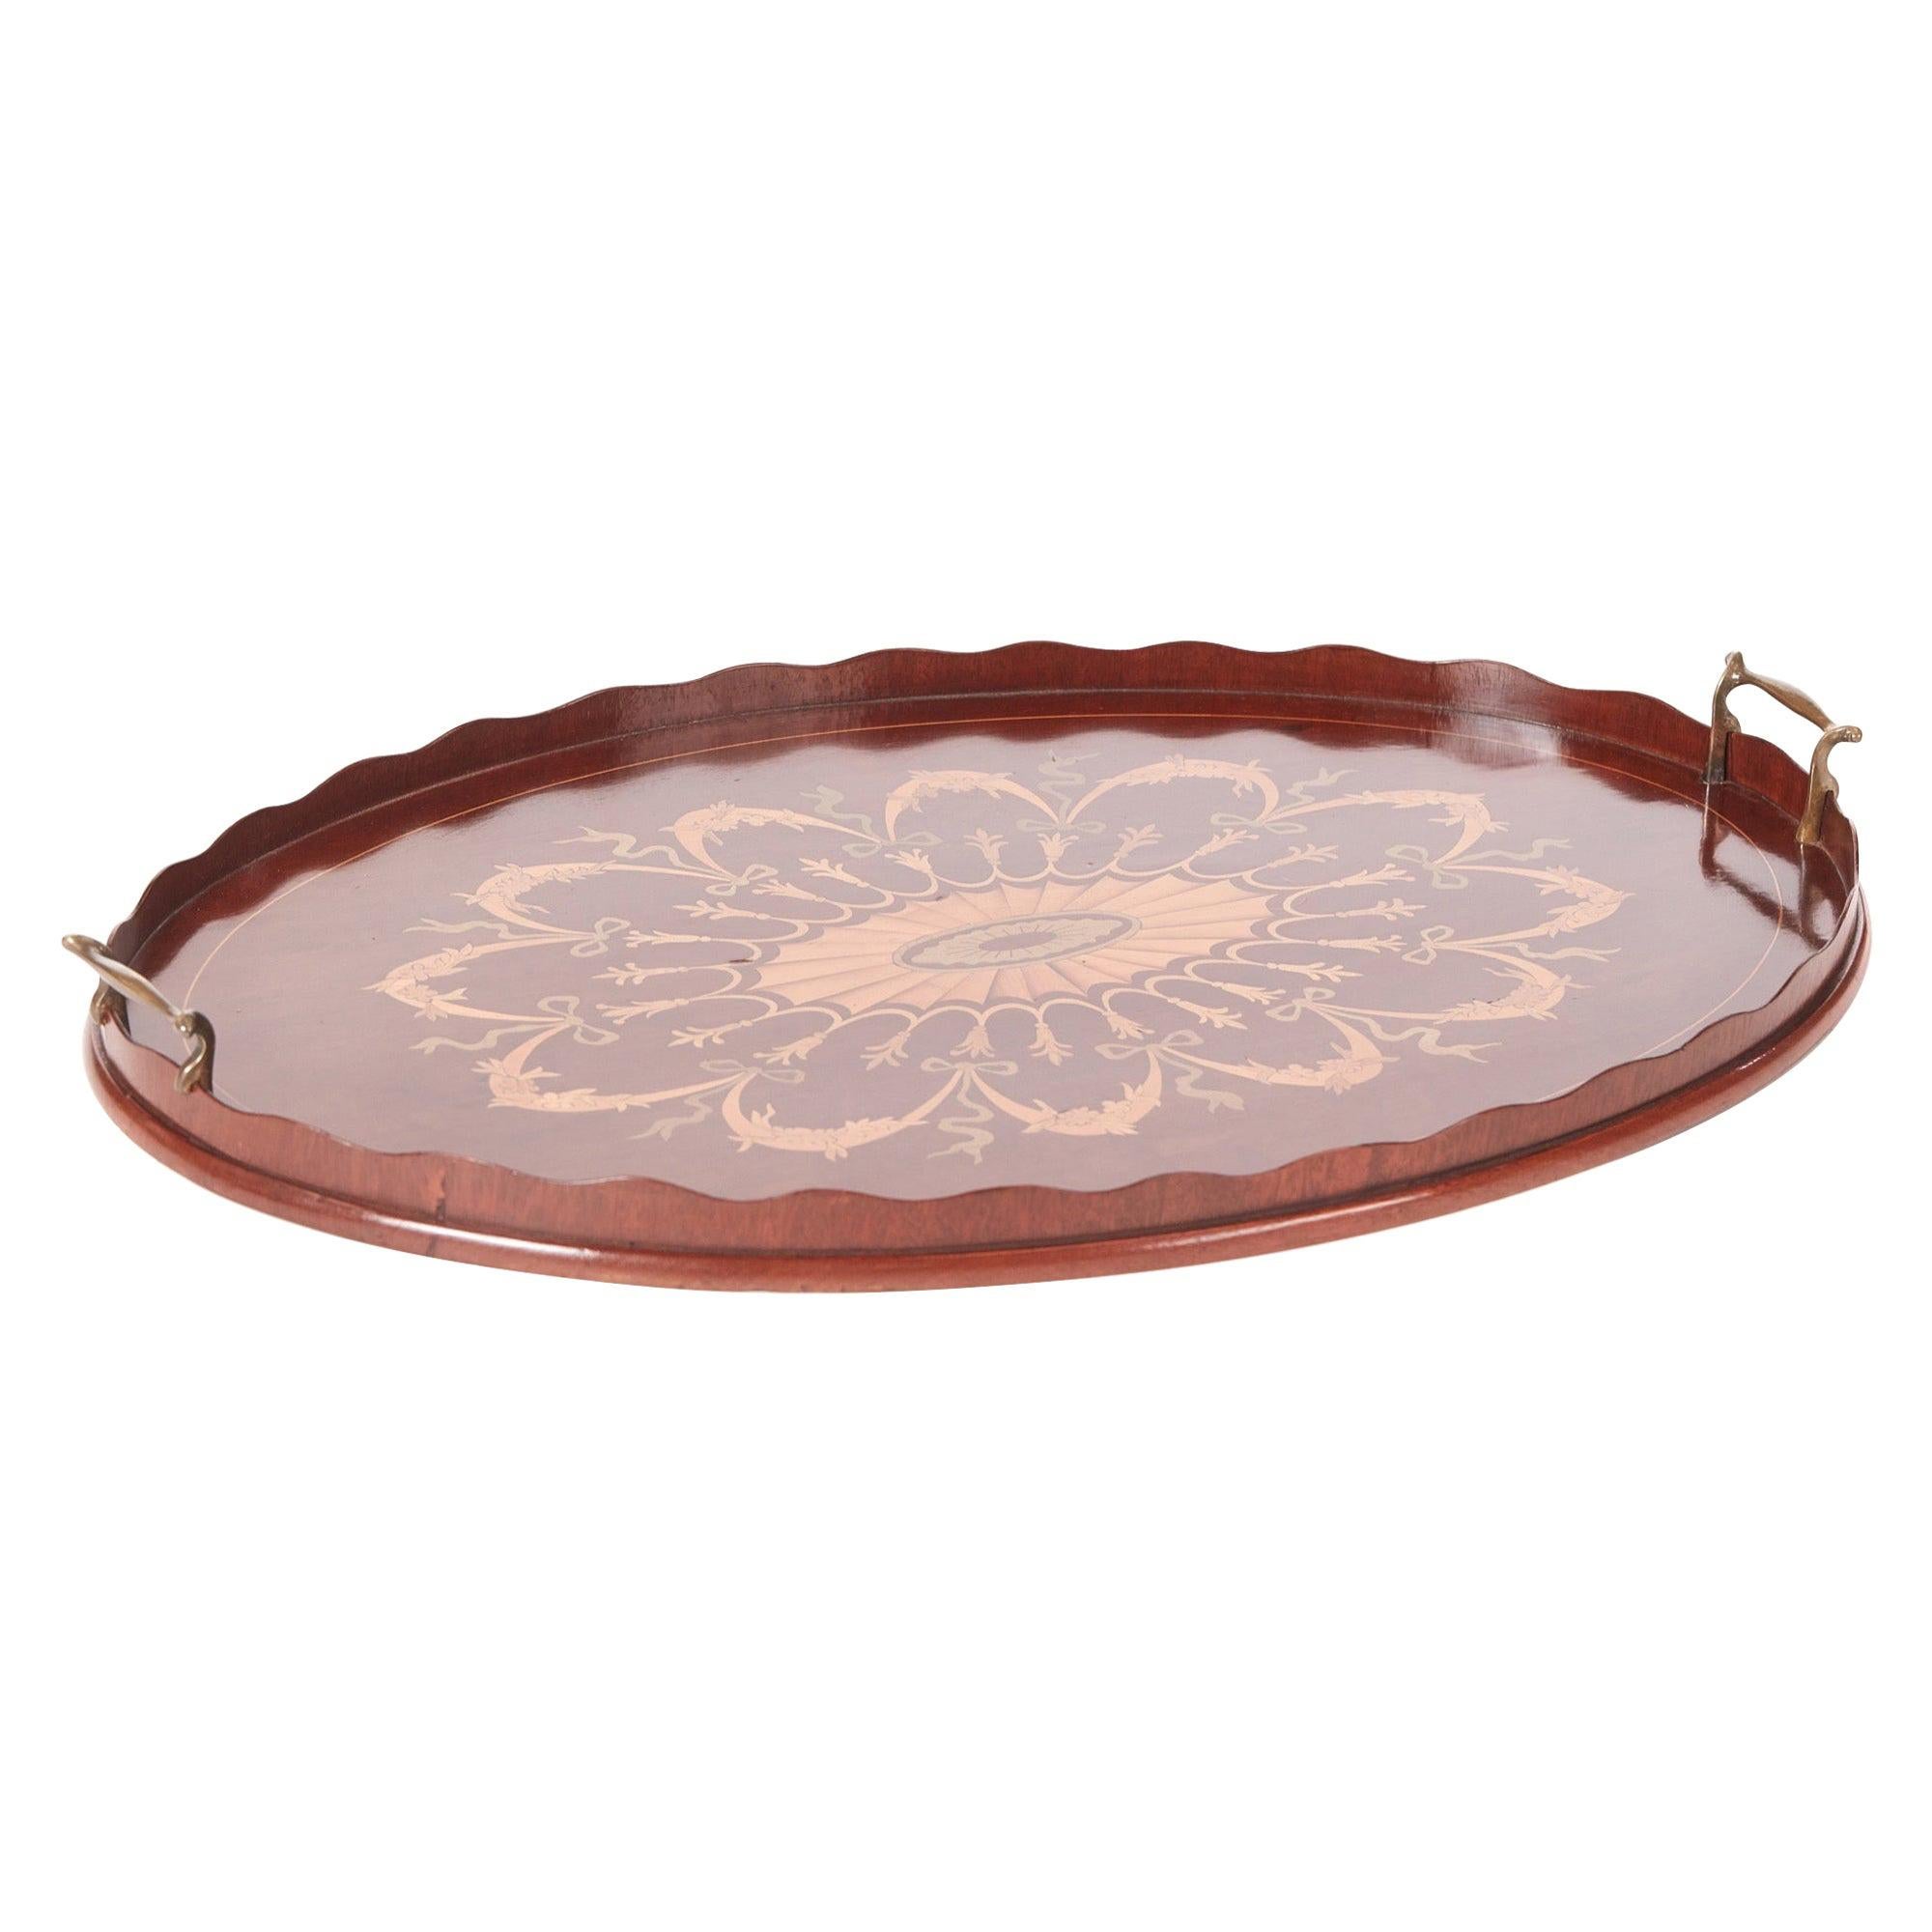 Outstanding Quality Antique Edwardian Inlaid Mahogany Tray